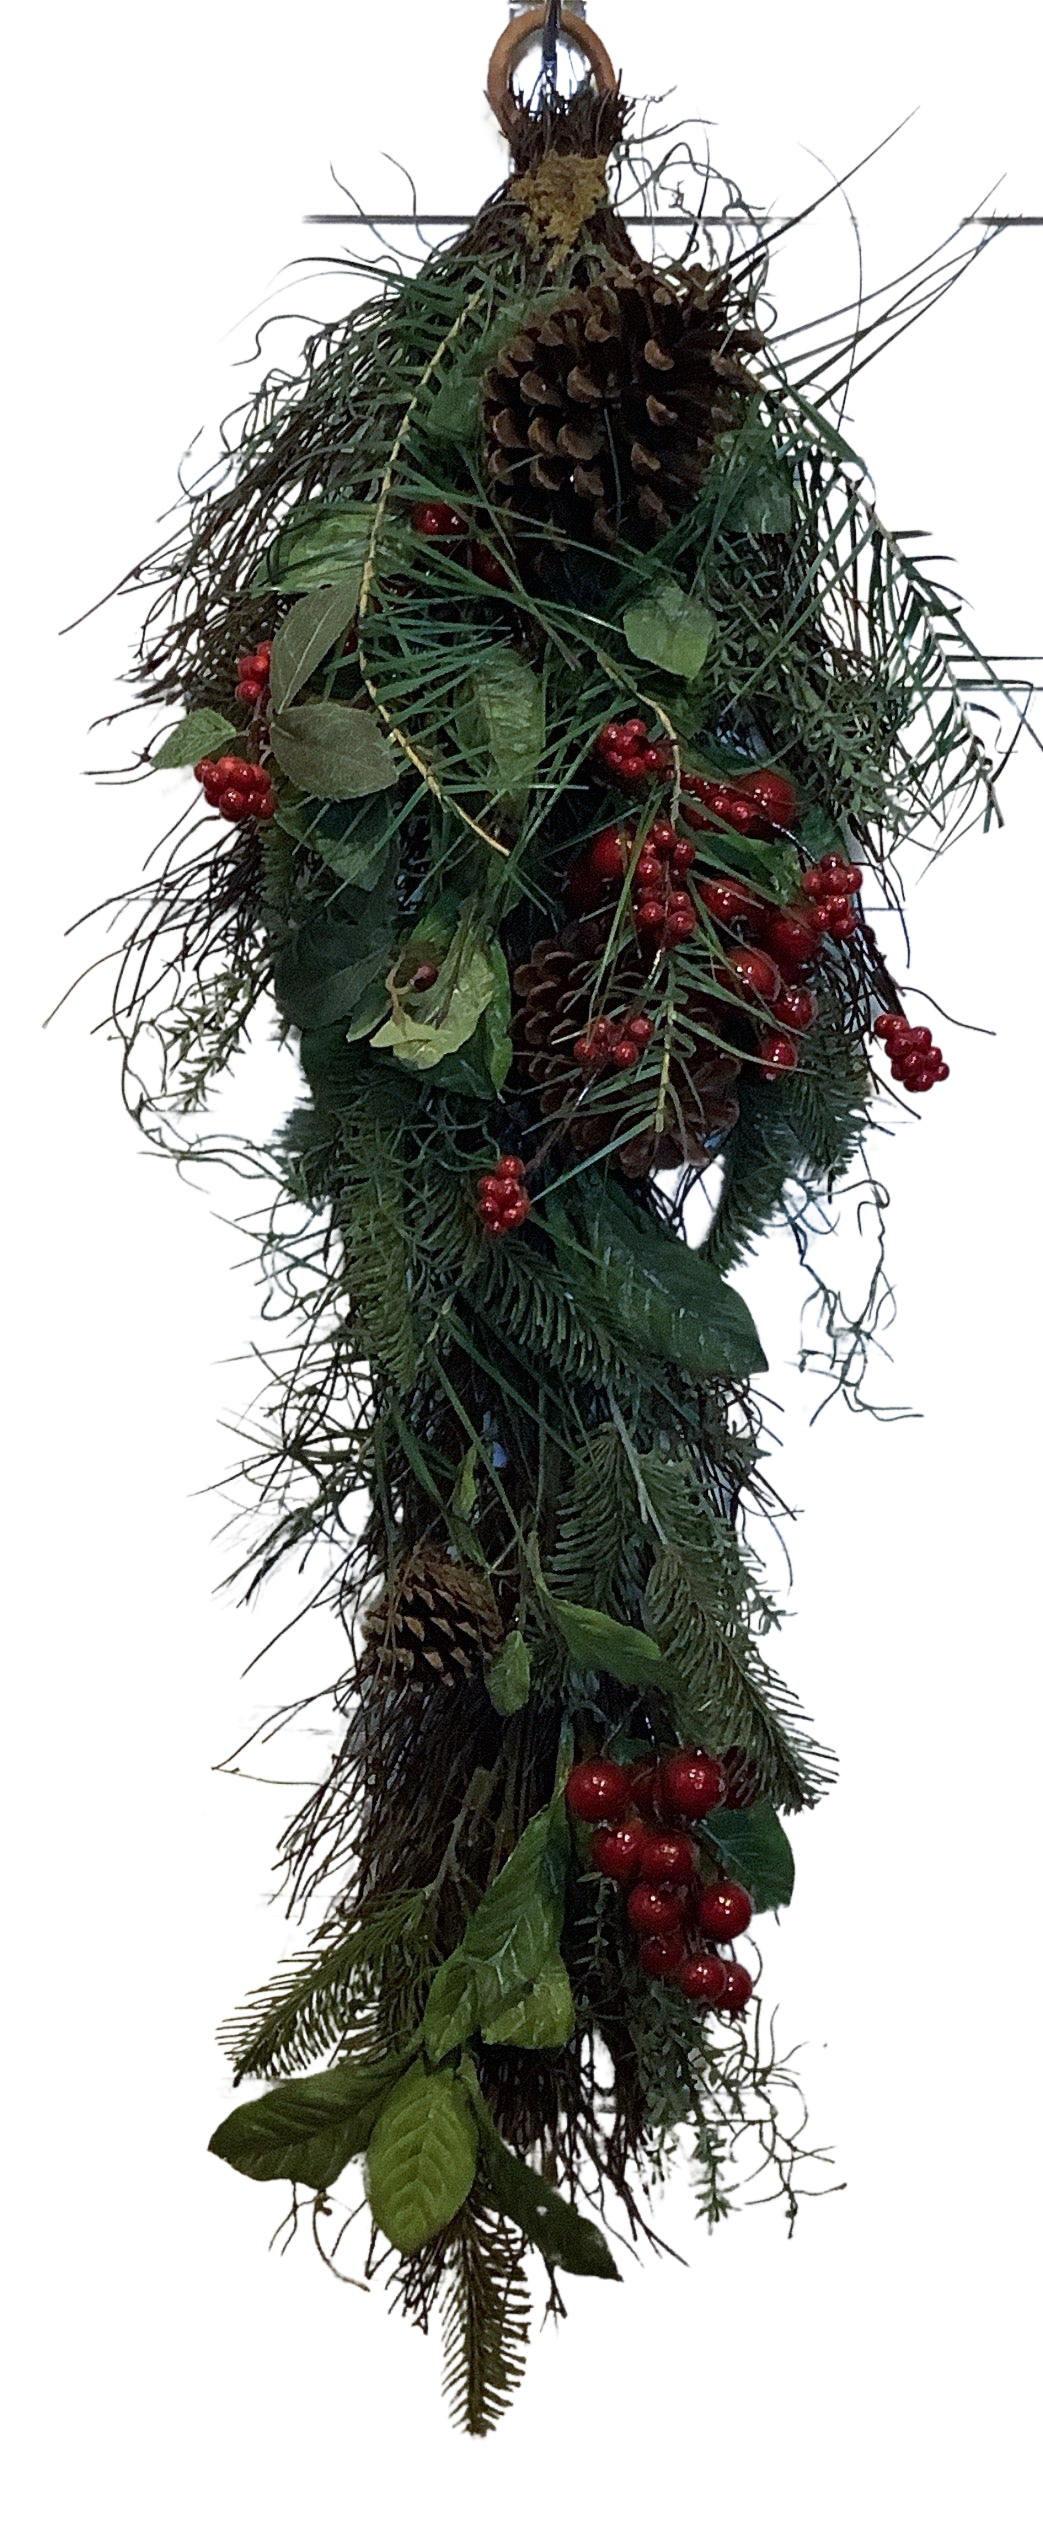 Greenery Wall Decor with Pine Cones/Red Berries 31